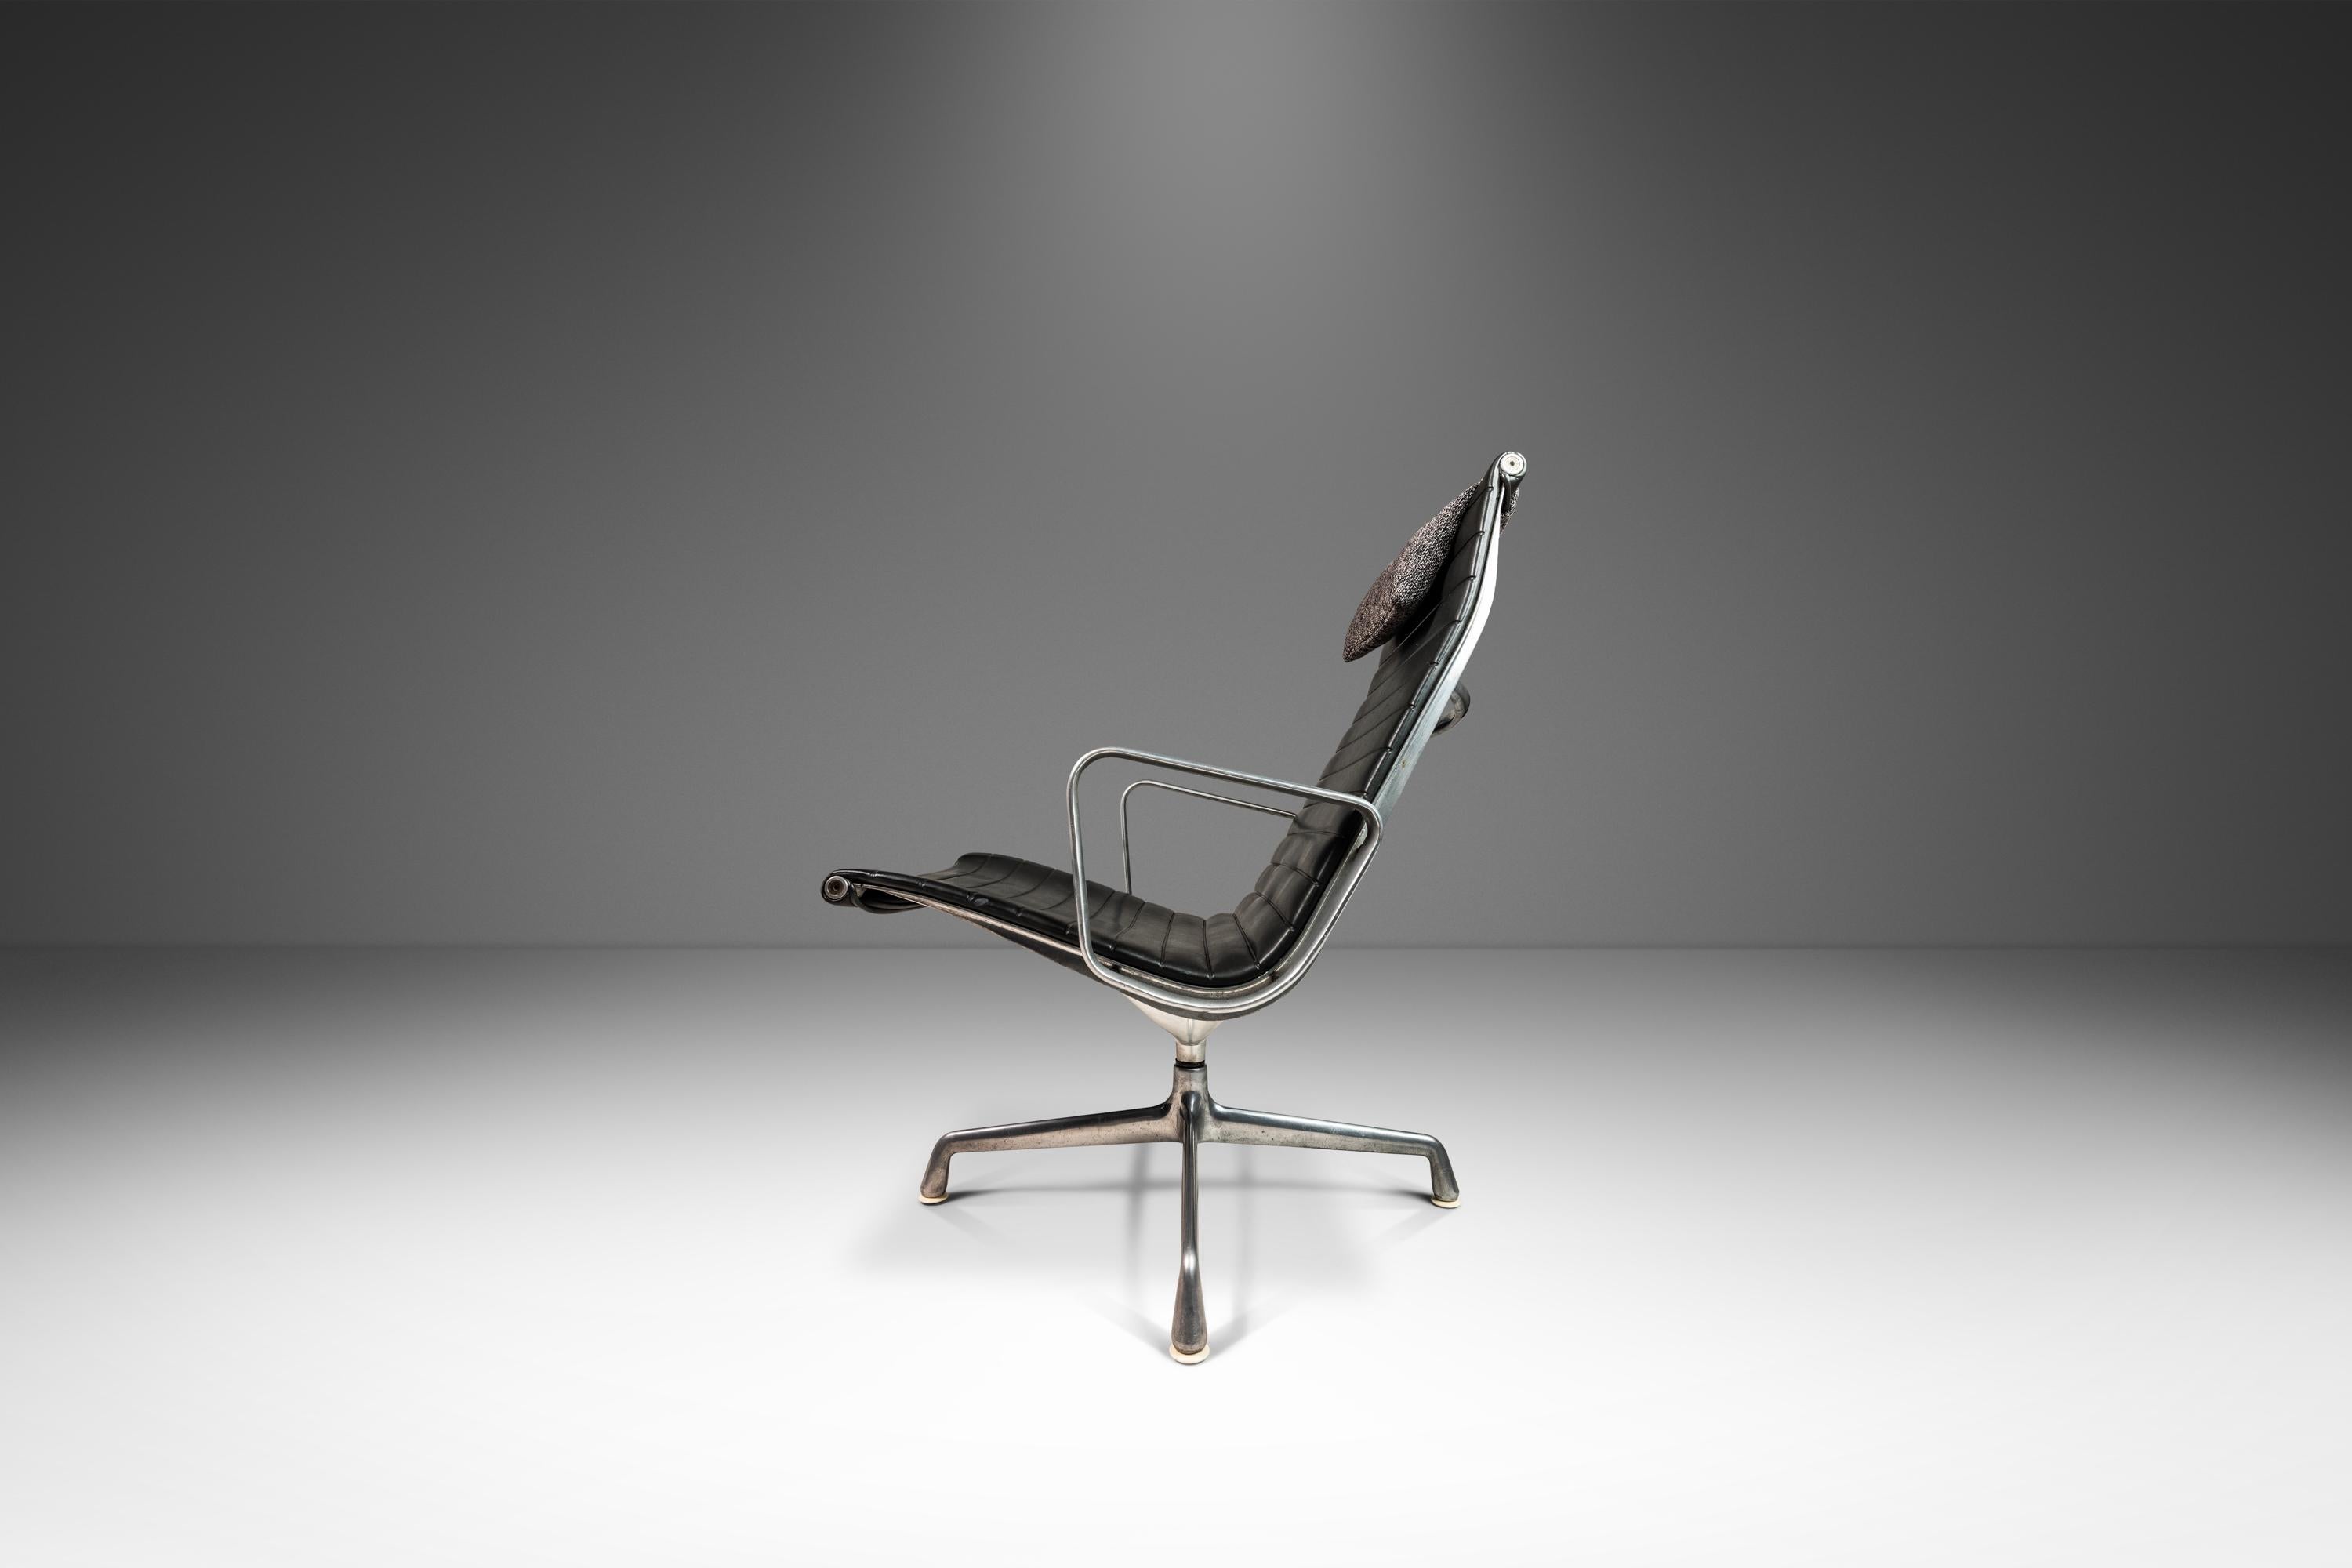 Introducing a rare, vintage Model EA 116 Swivel Chair designed by Eames couple for their now iconic 'Aluminium Group'. Designed by Charles and Ray Eames in 1958, the aluminum chair is one of the most outstanding and archetypal furniture designs of